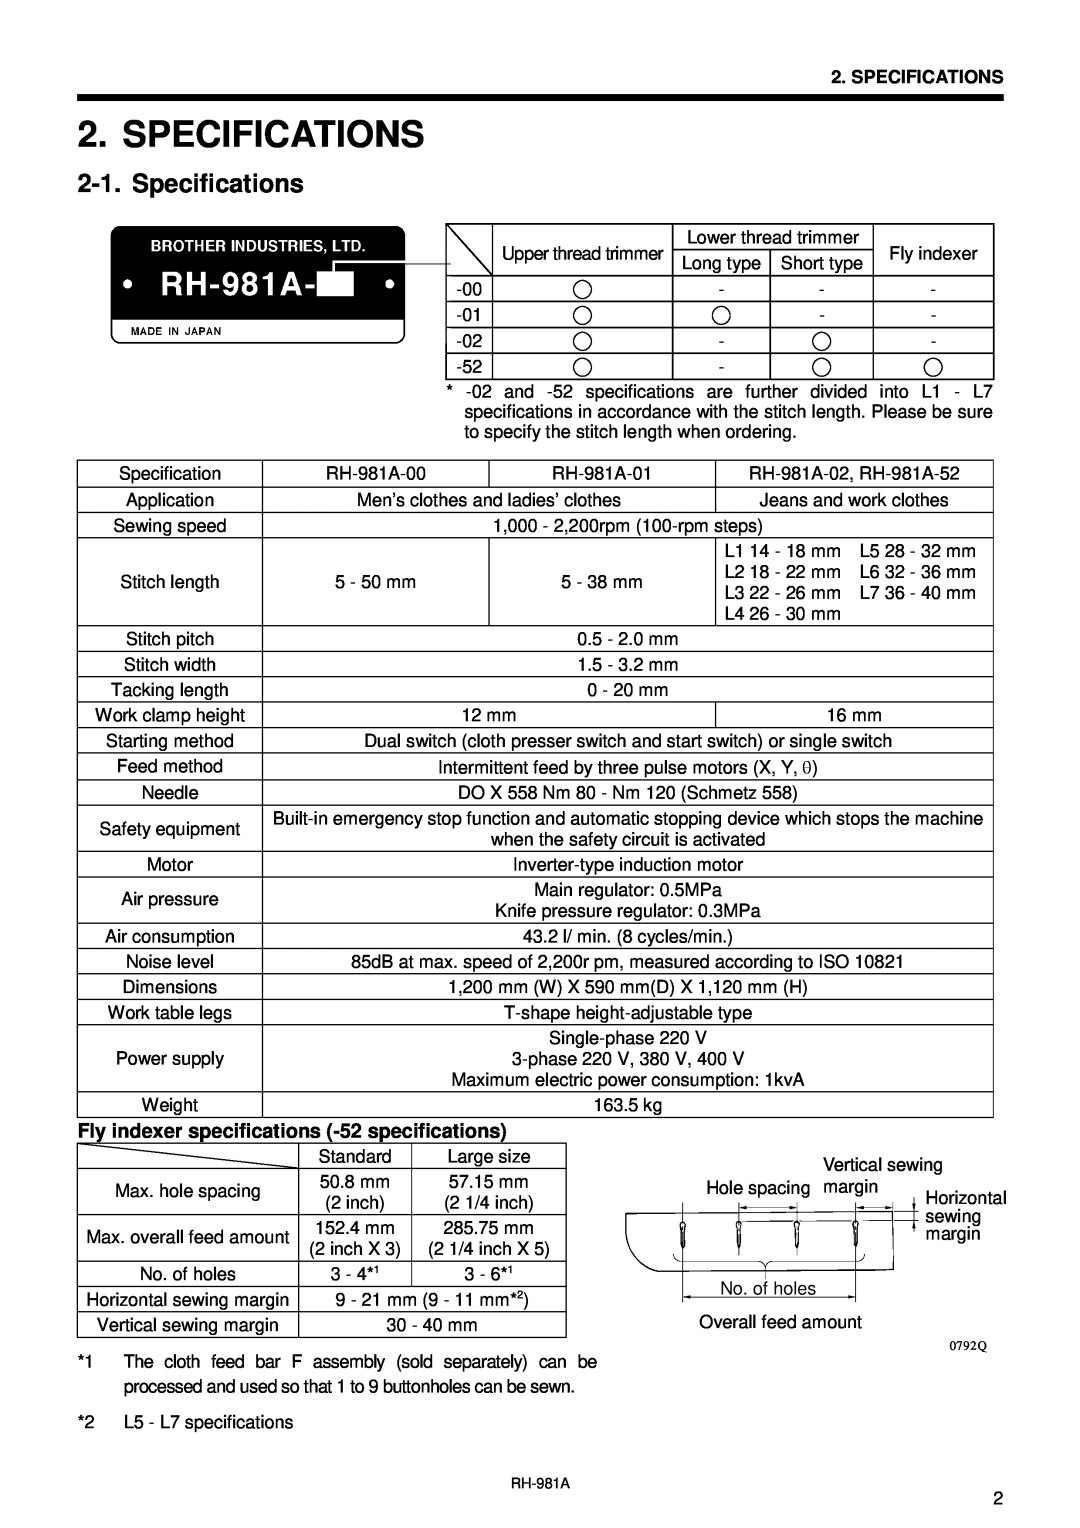 Brother rh-918a manual Specifications, Fly indexer specifications -52 specifications 